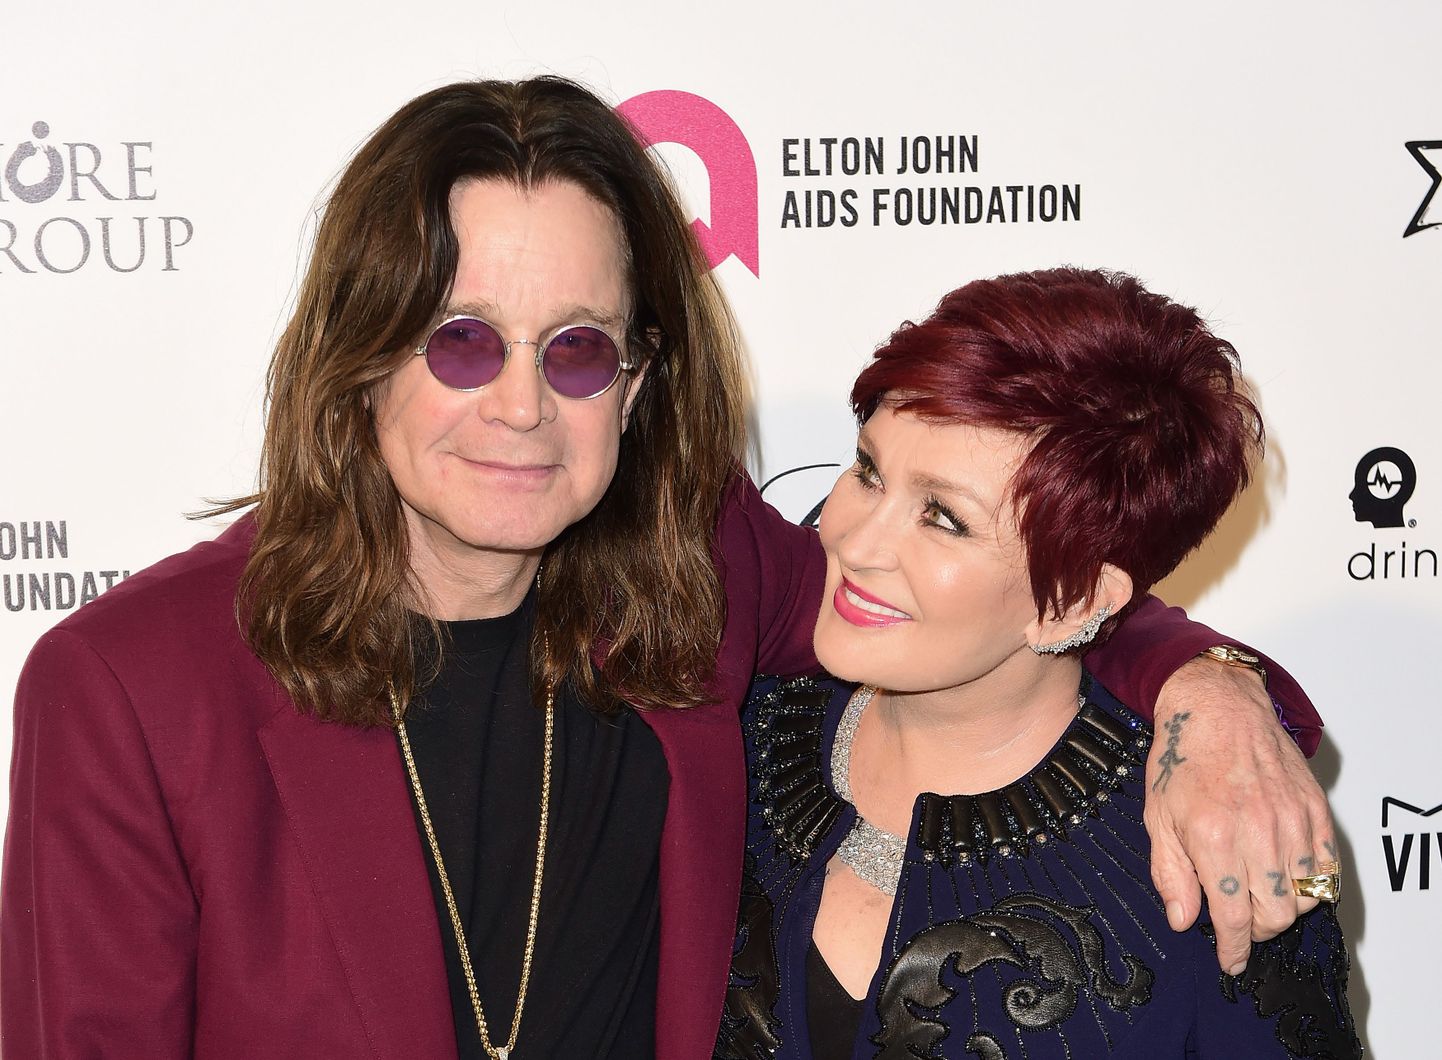 Singer Ozzy Osbourne and his wife Sharon arrive at the 2015 Elton John AIDS Foundation Oscar Party in West Hollywood, California February 22, 2015. REUTERS/Gus Ruelas (UNITED STATES TAGS: ENTERTAINMENT) (OSCARS-PARTIES)